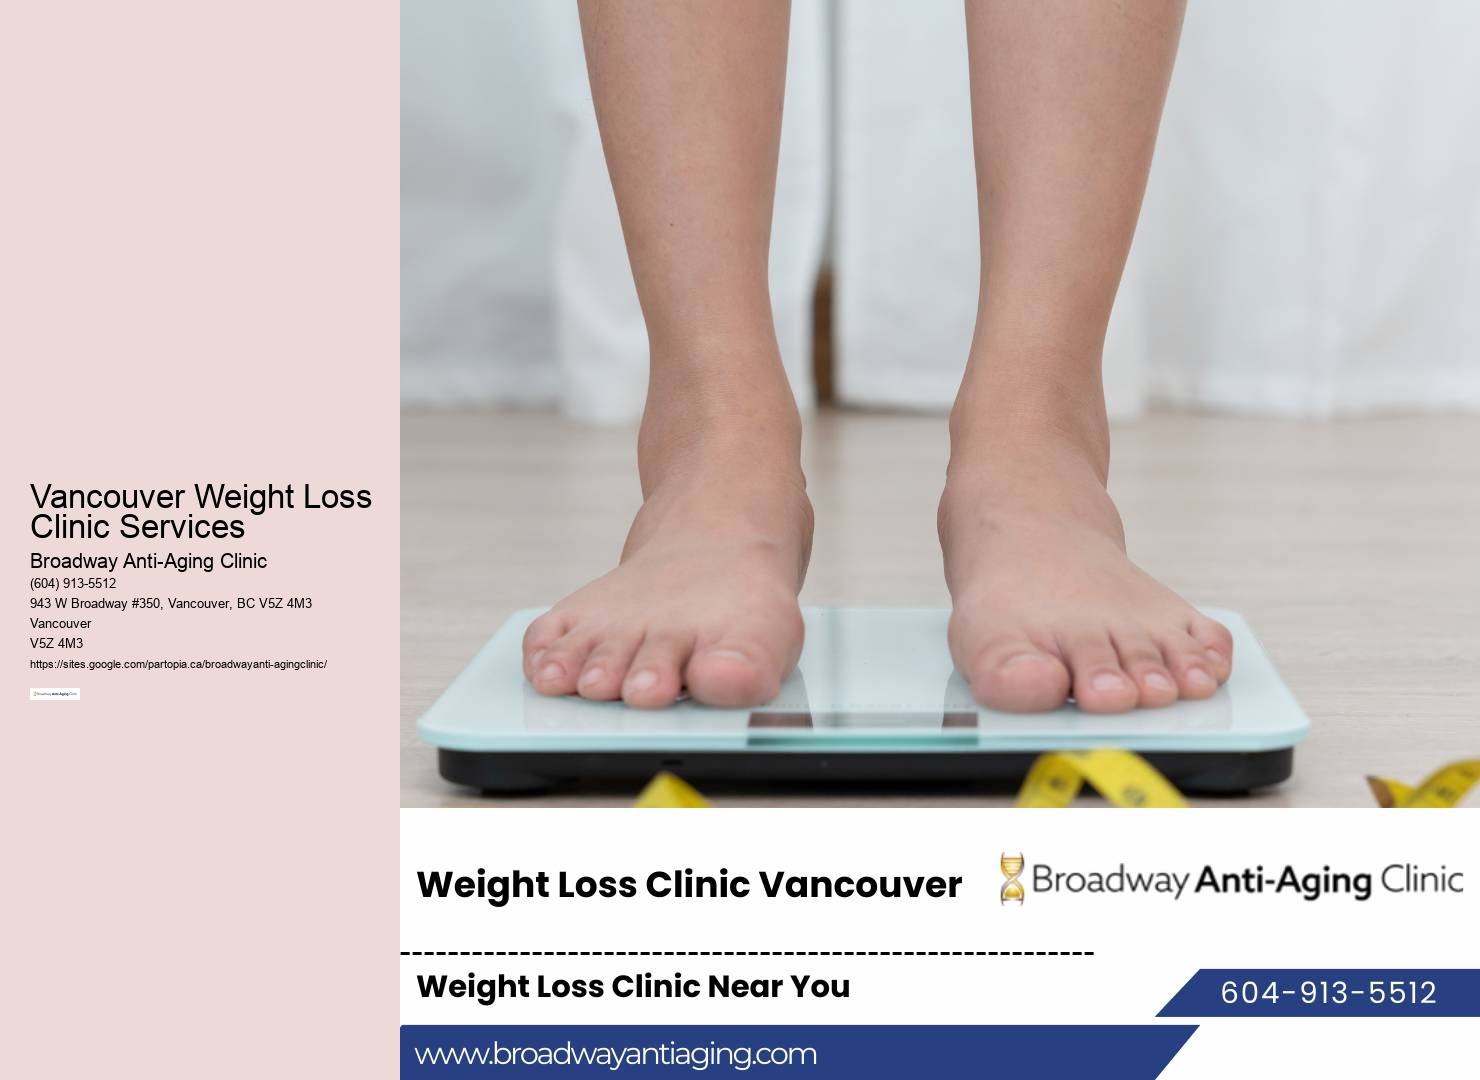 Welcoming Lose Weight Clinics Near Me